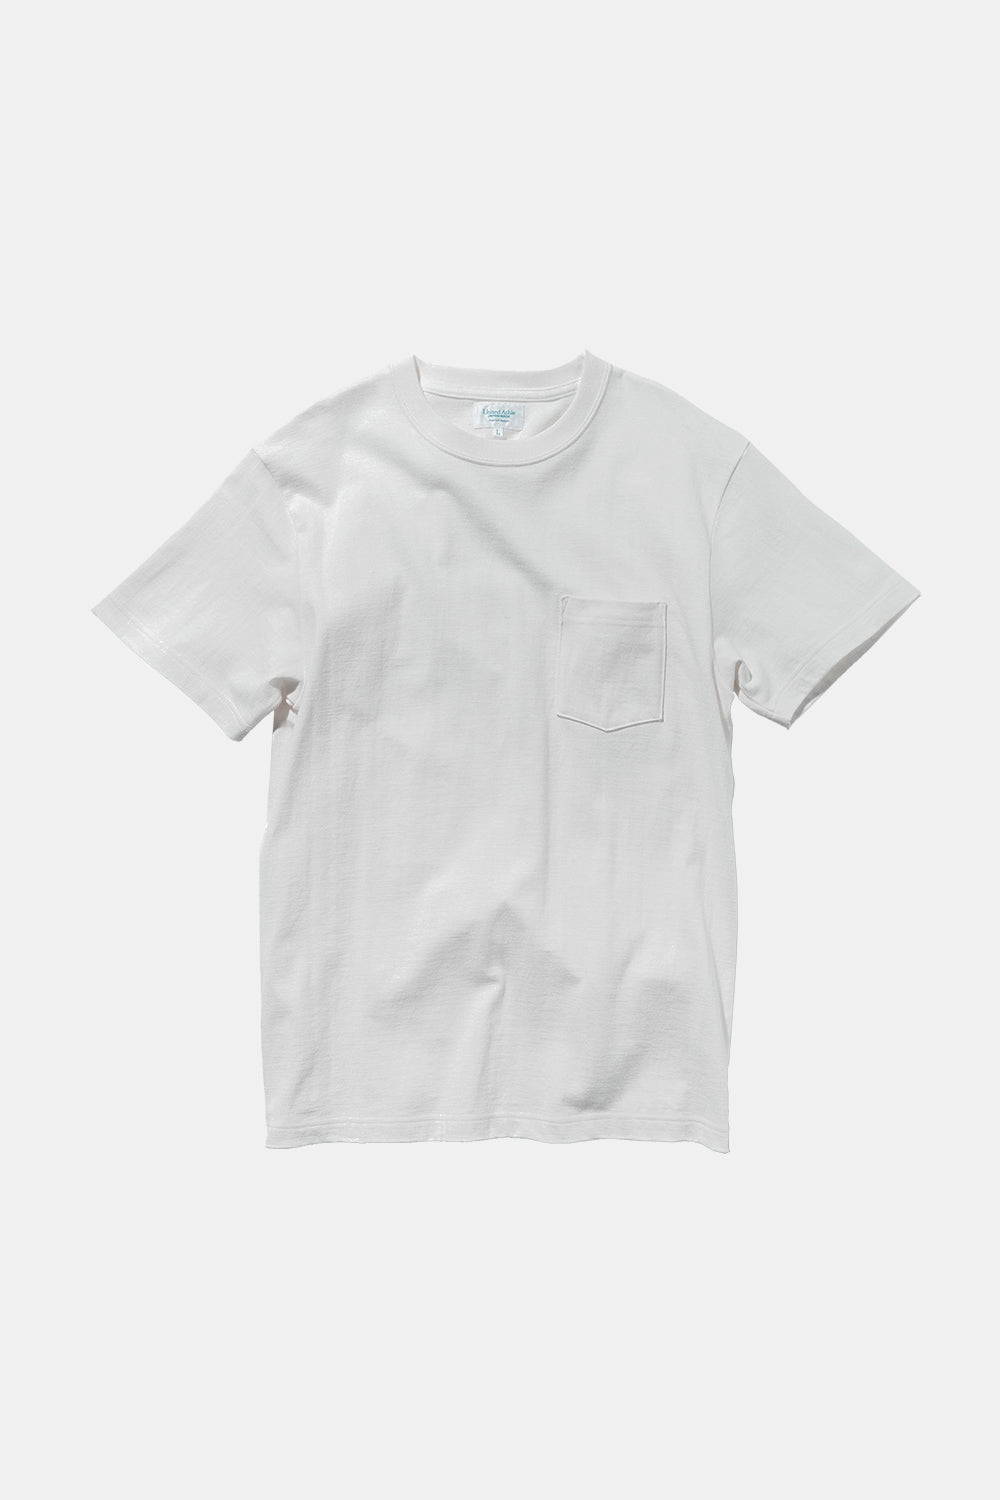 United Athle Japan Made Standard Fit Pocket T-shirt (White)